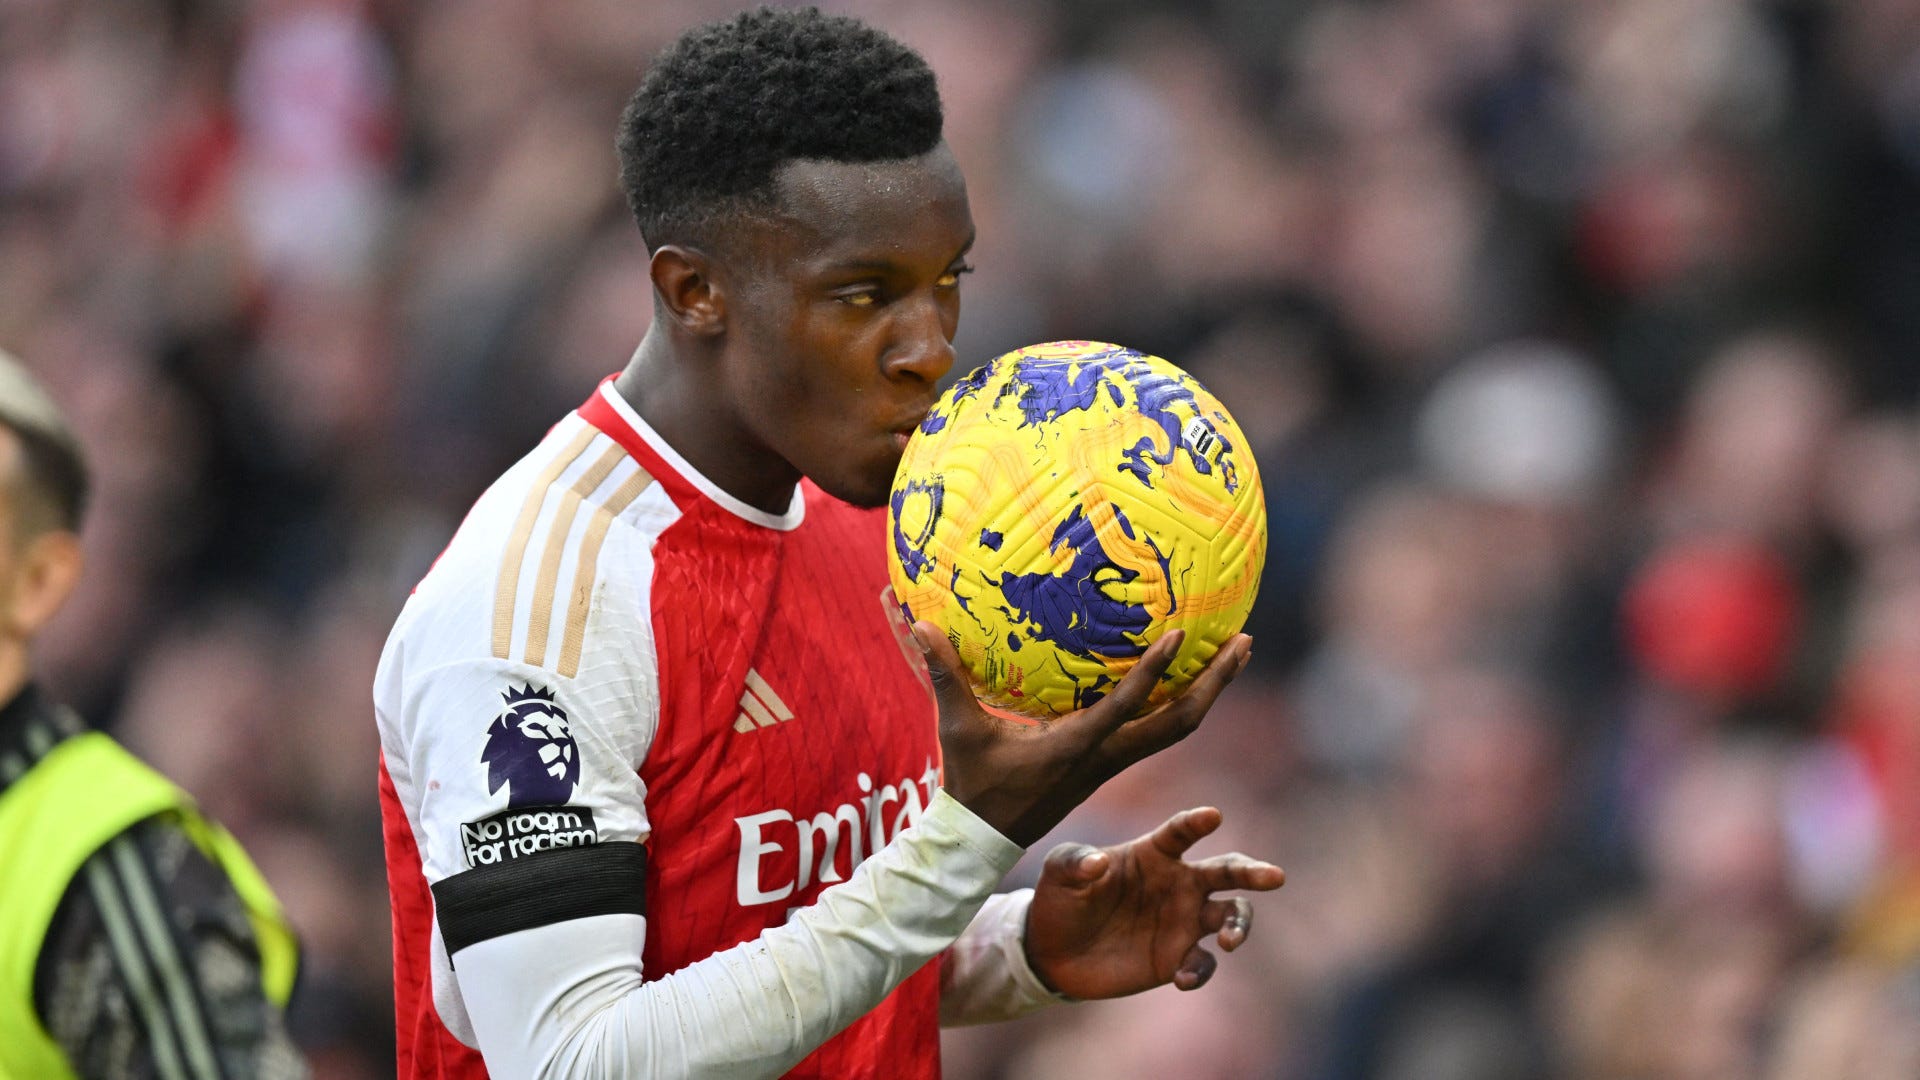 will-eddie-nketiah-be-sold-mikel-arteta-makes-decision-on-arsenal-forward-s-future-amid-brentford-and-crystal-palace-interest-or-goal-com-india